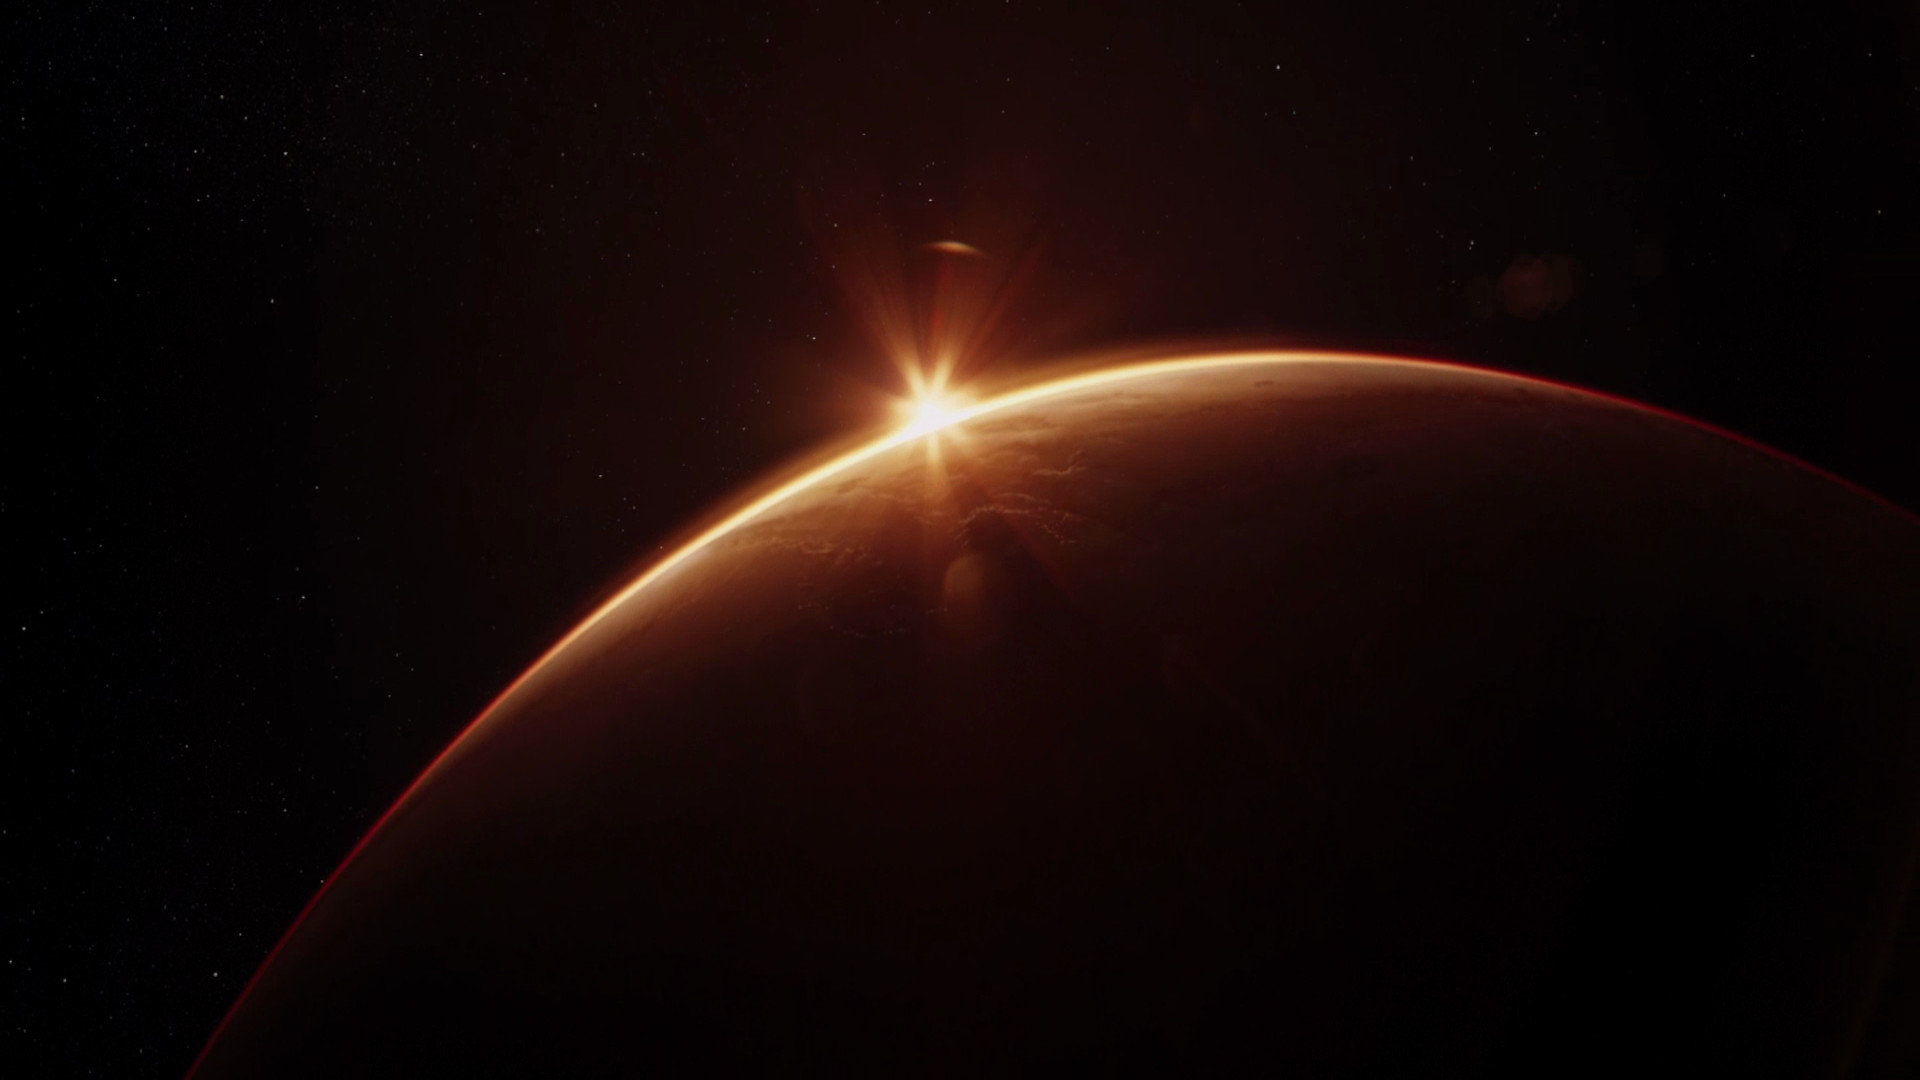 the martian movie streaming